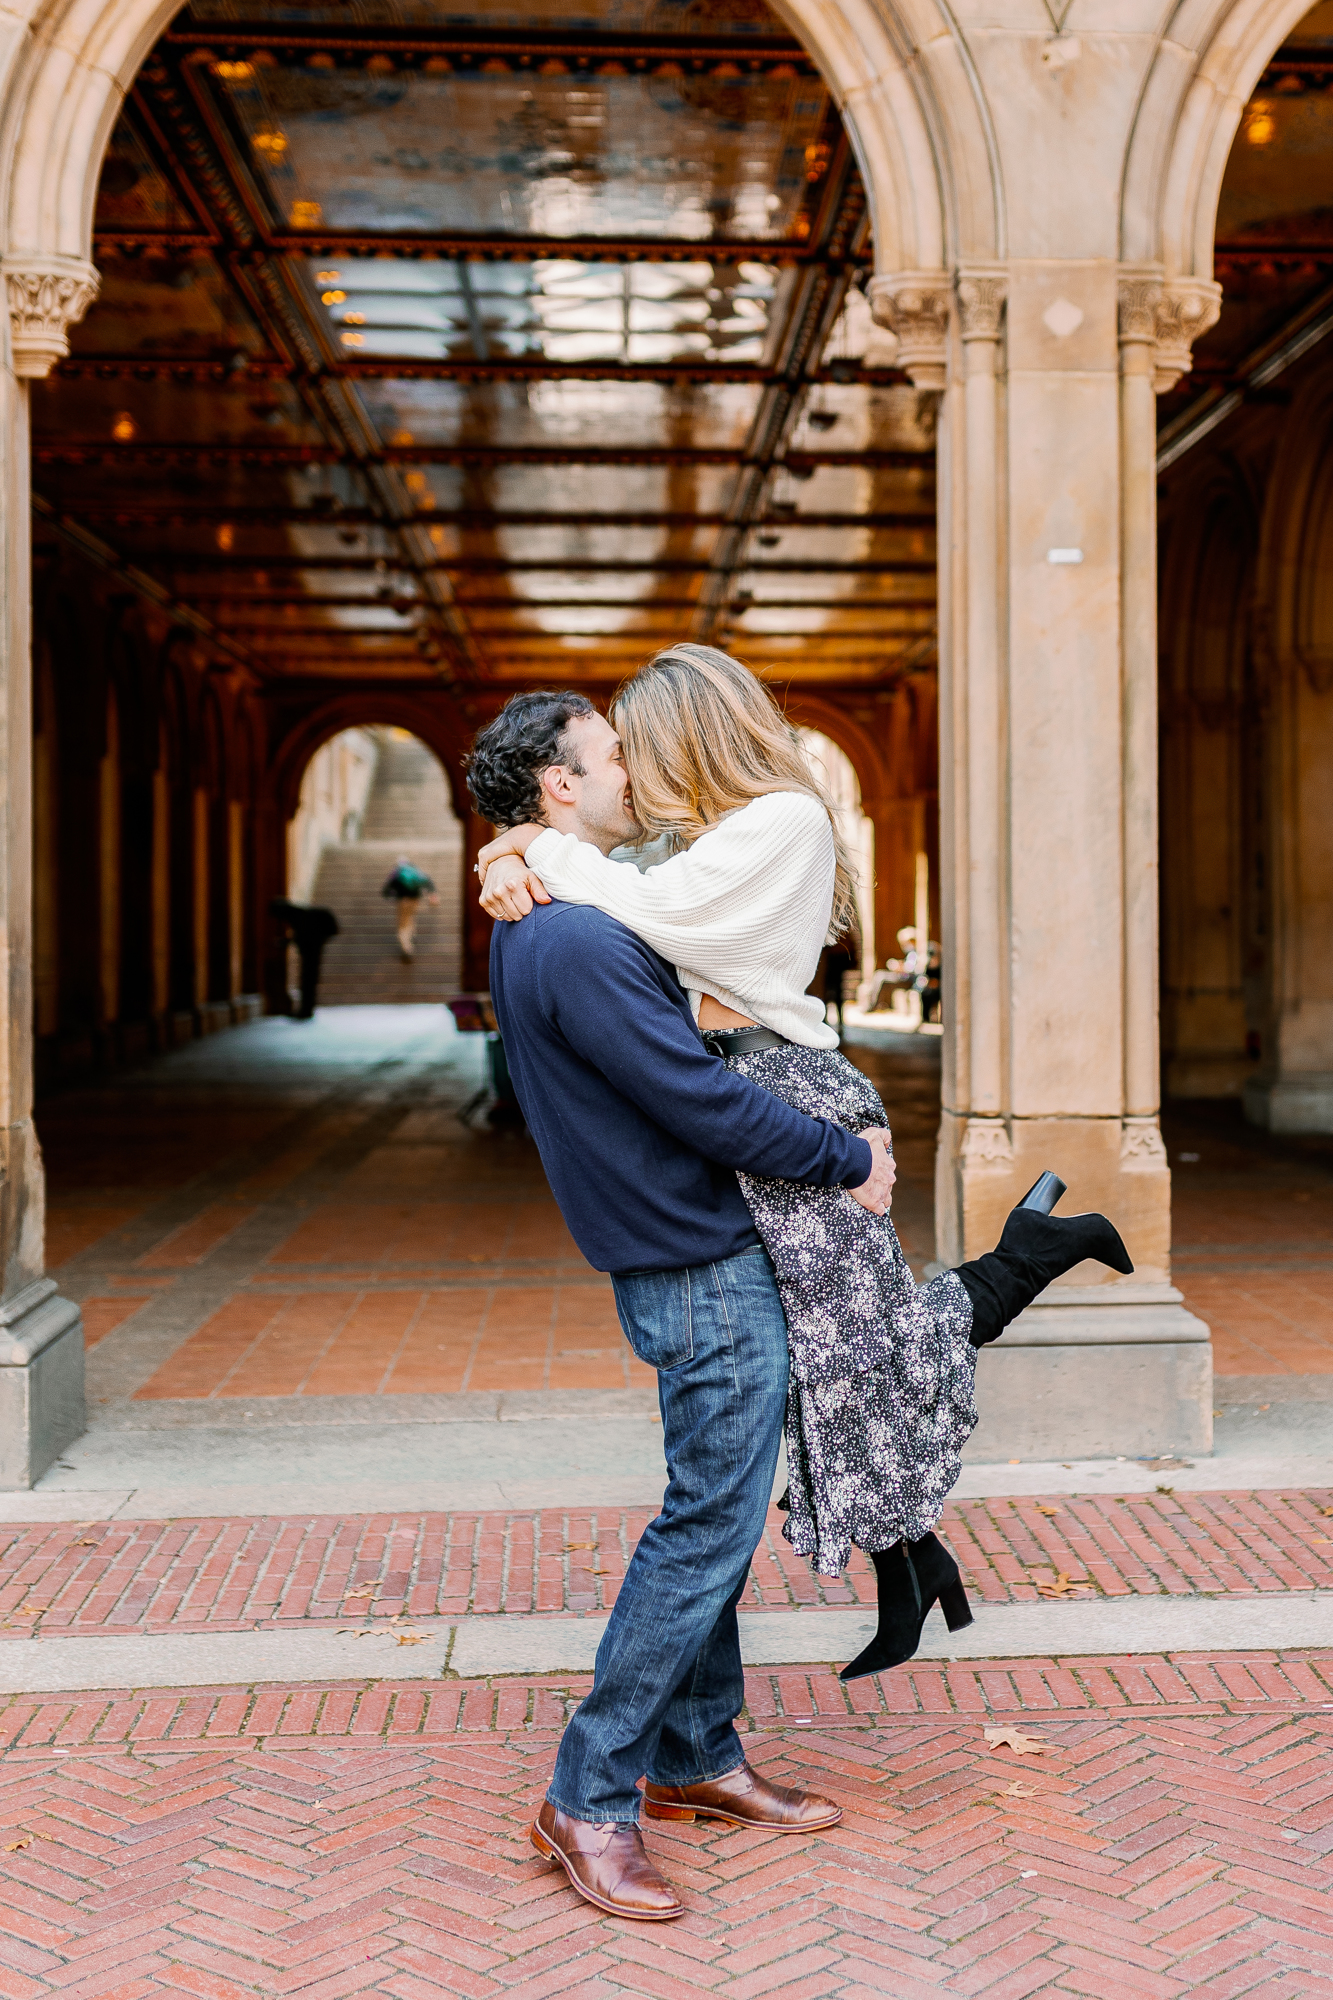 Engagement photos at Bethesda Terrace in Central Park